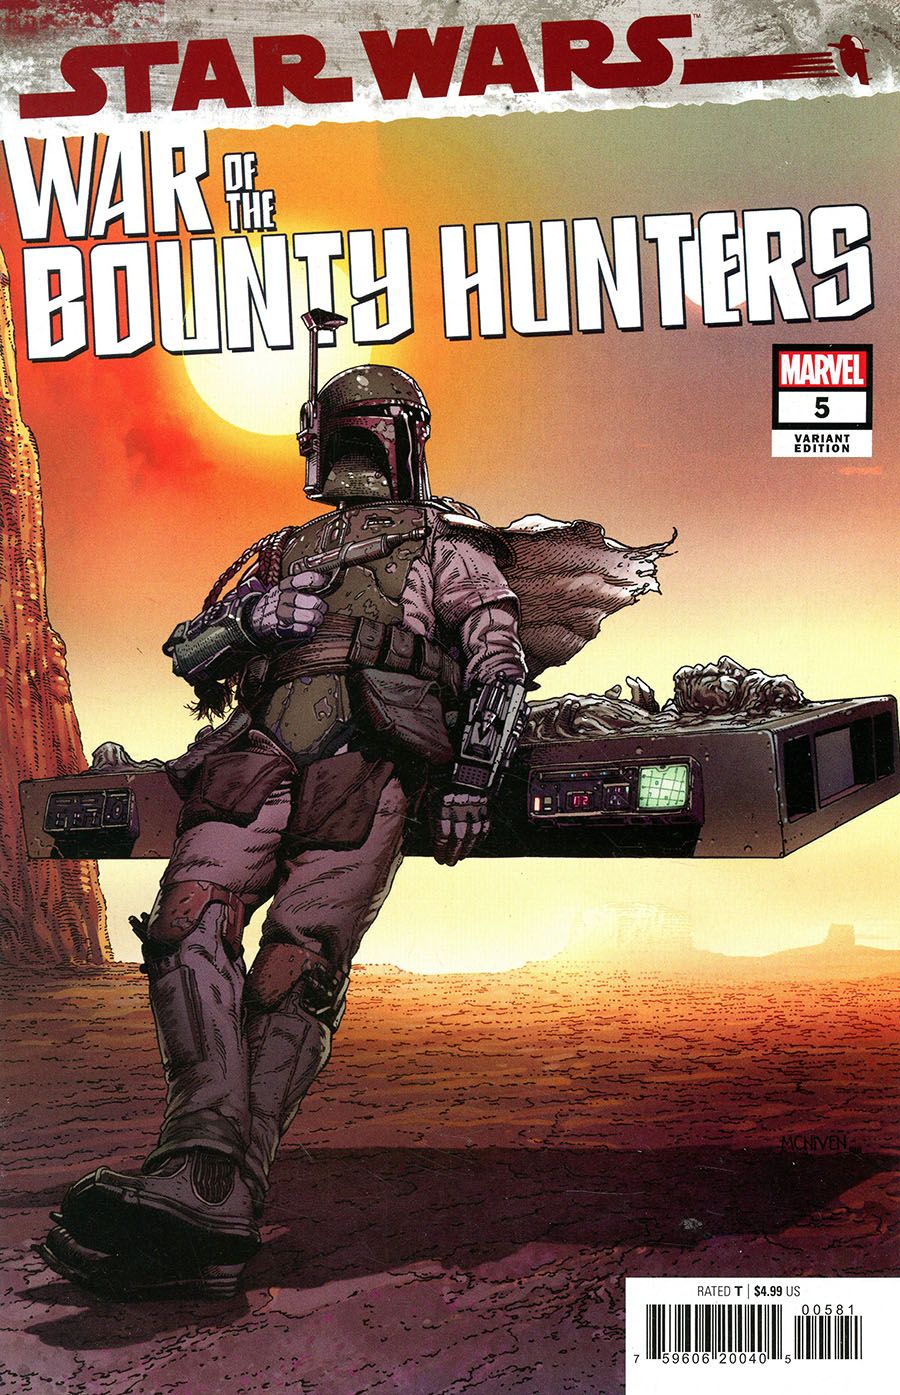 WK41 MCNIVEN CARBONITE VARIANT WAR OF THE BOUNTY HUNTERS #5E STAR WARS 